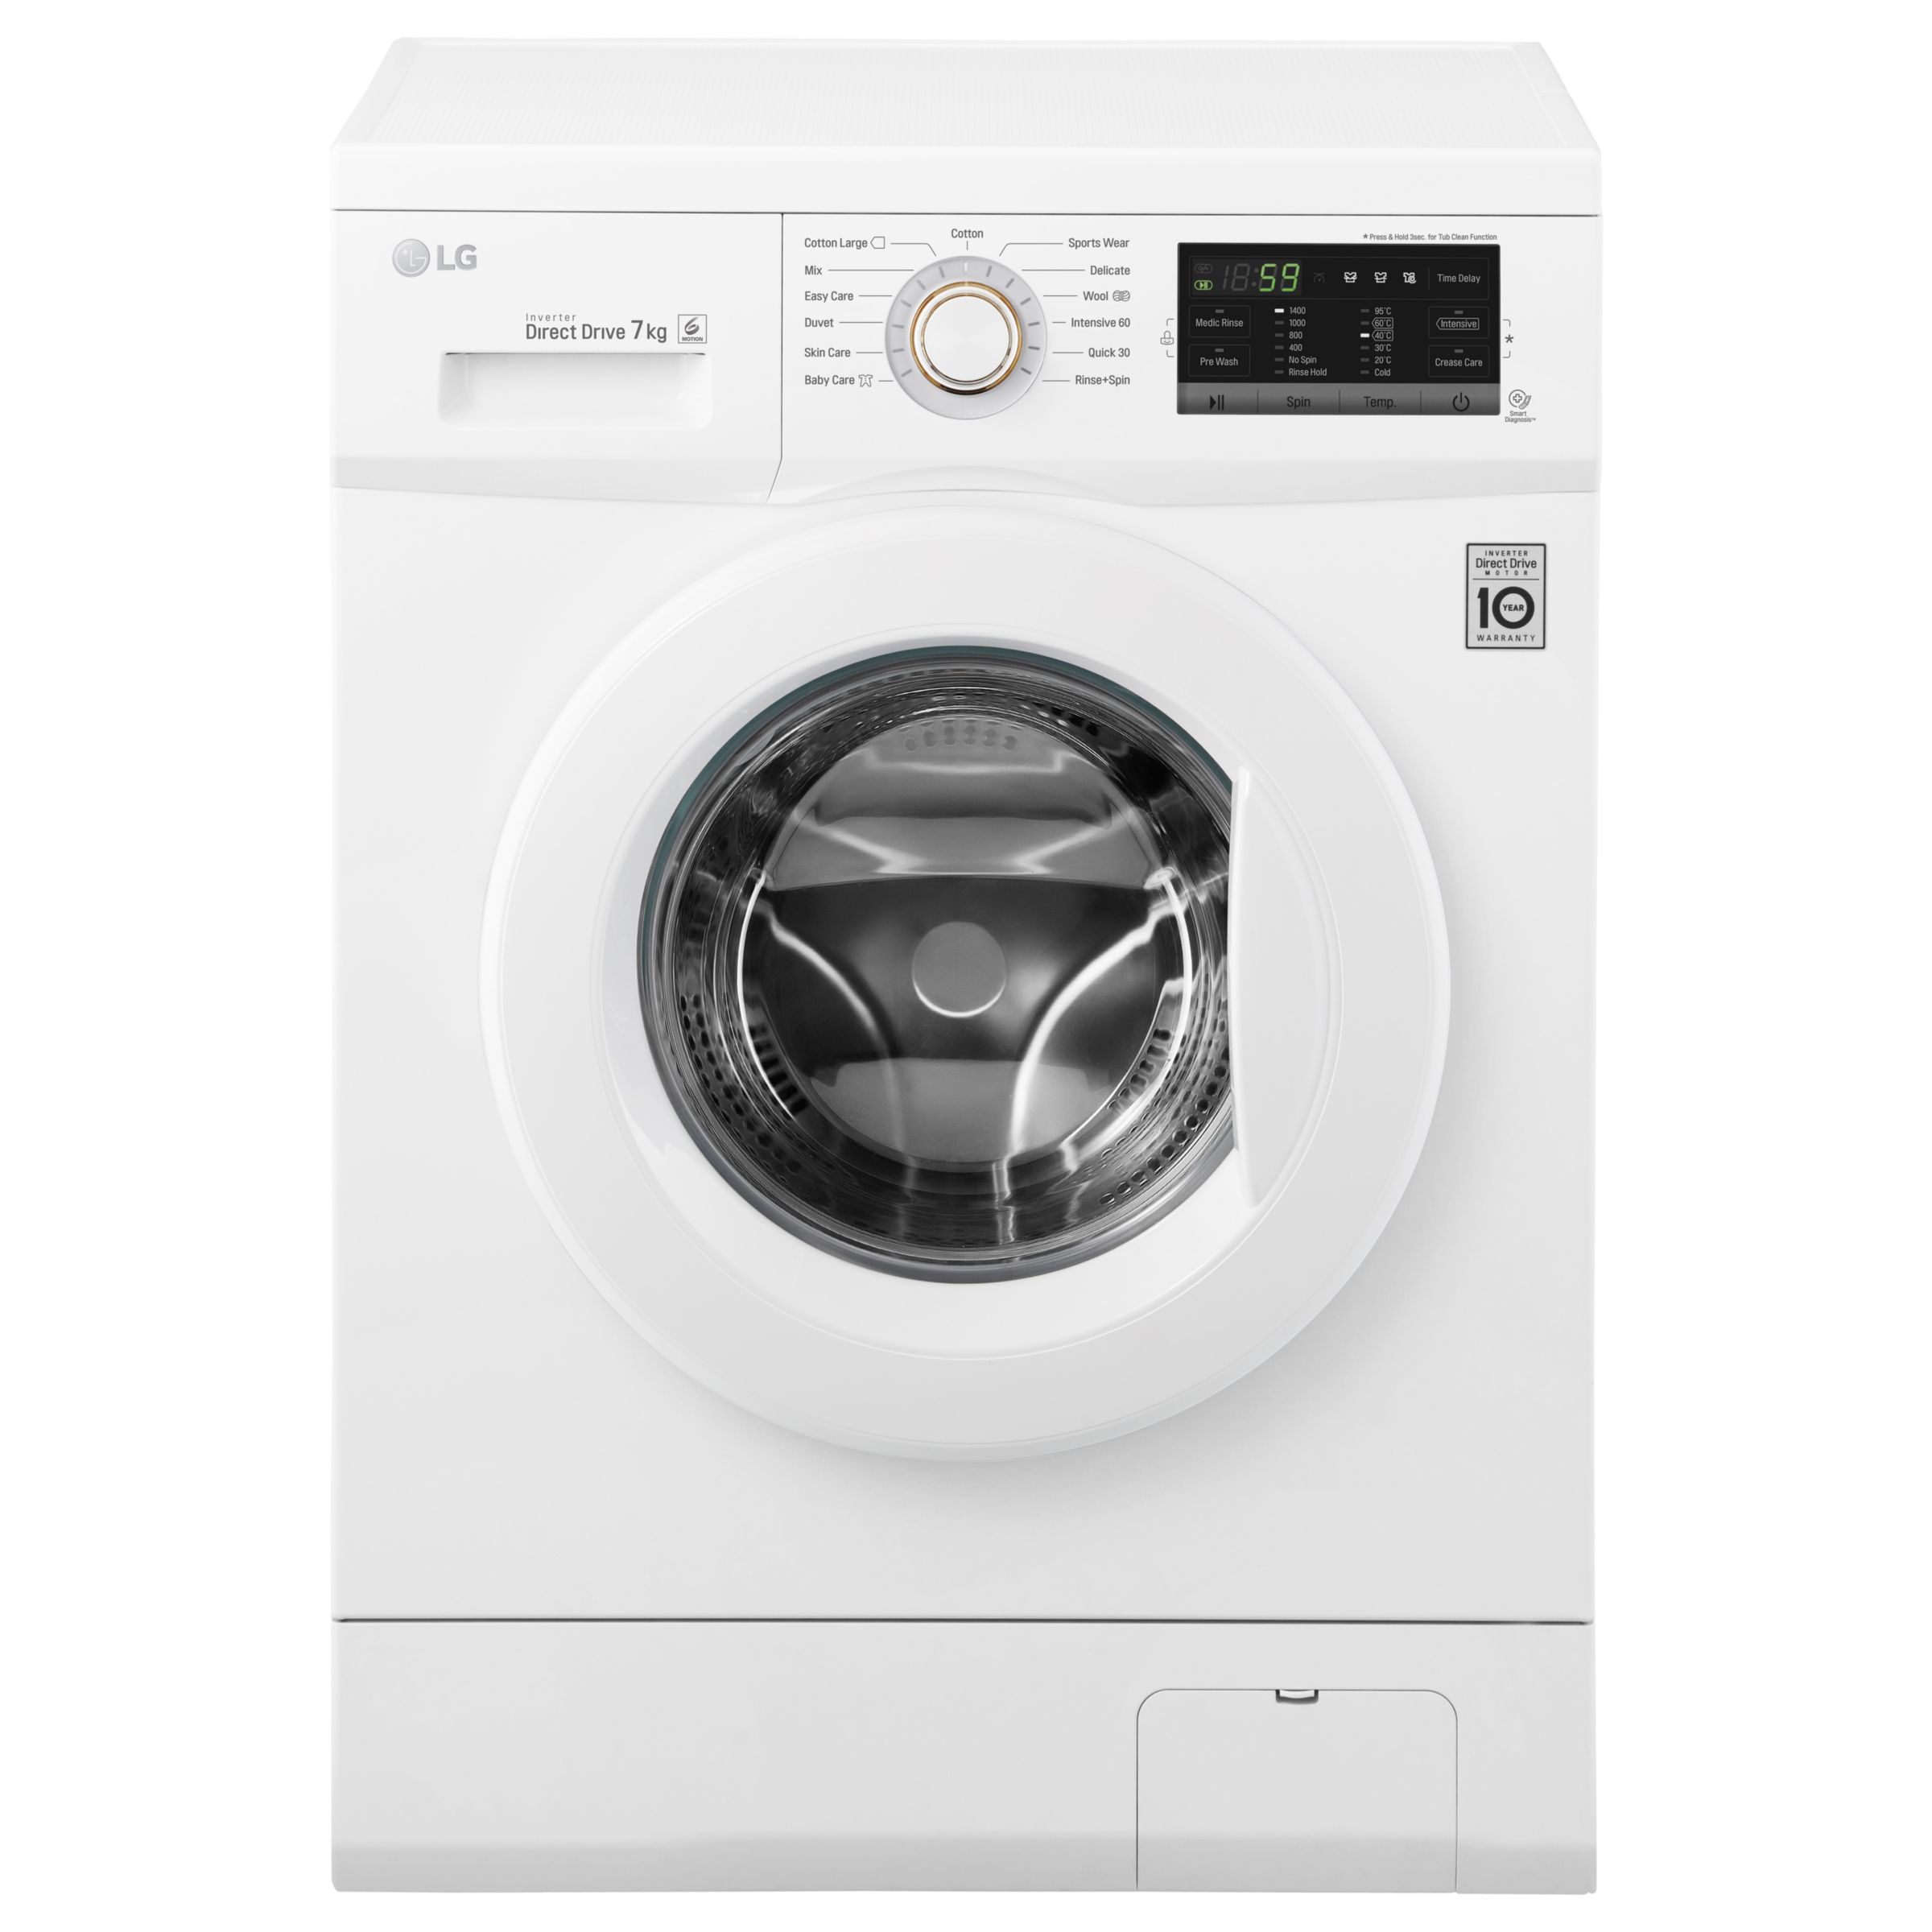 LG FH4G7QDN0 Freestanding Washing Machine, 7kg Load, A+++ Energy Rating, 1400rpm Spin in White